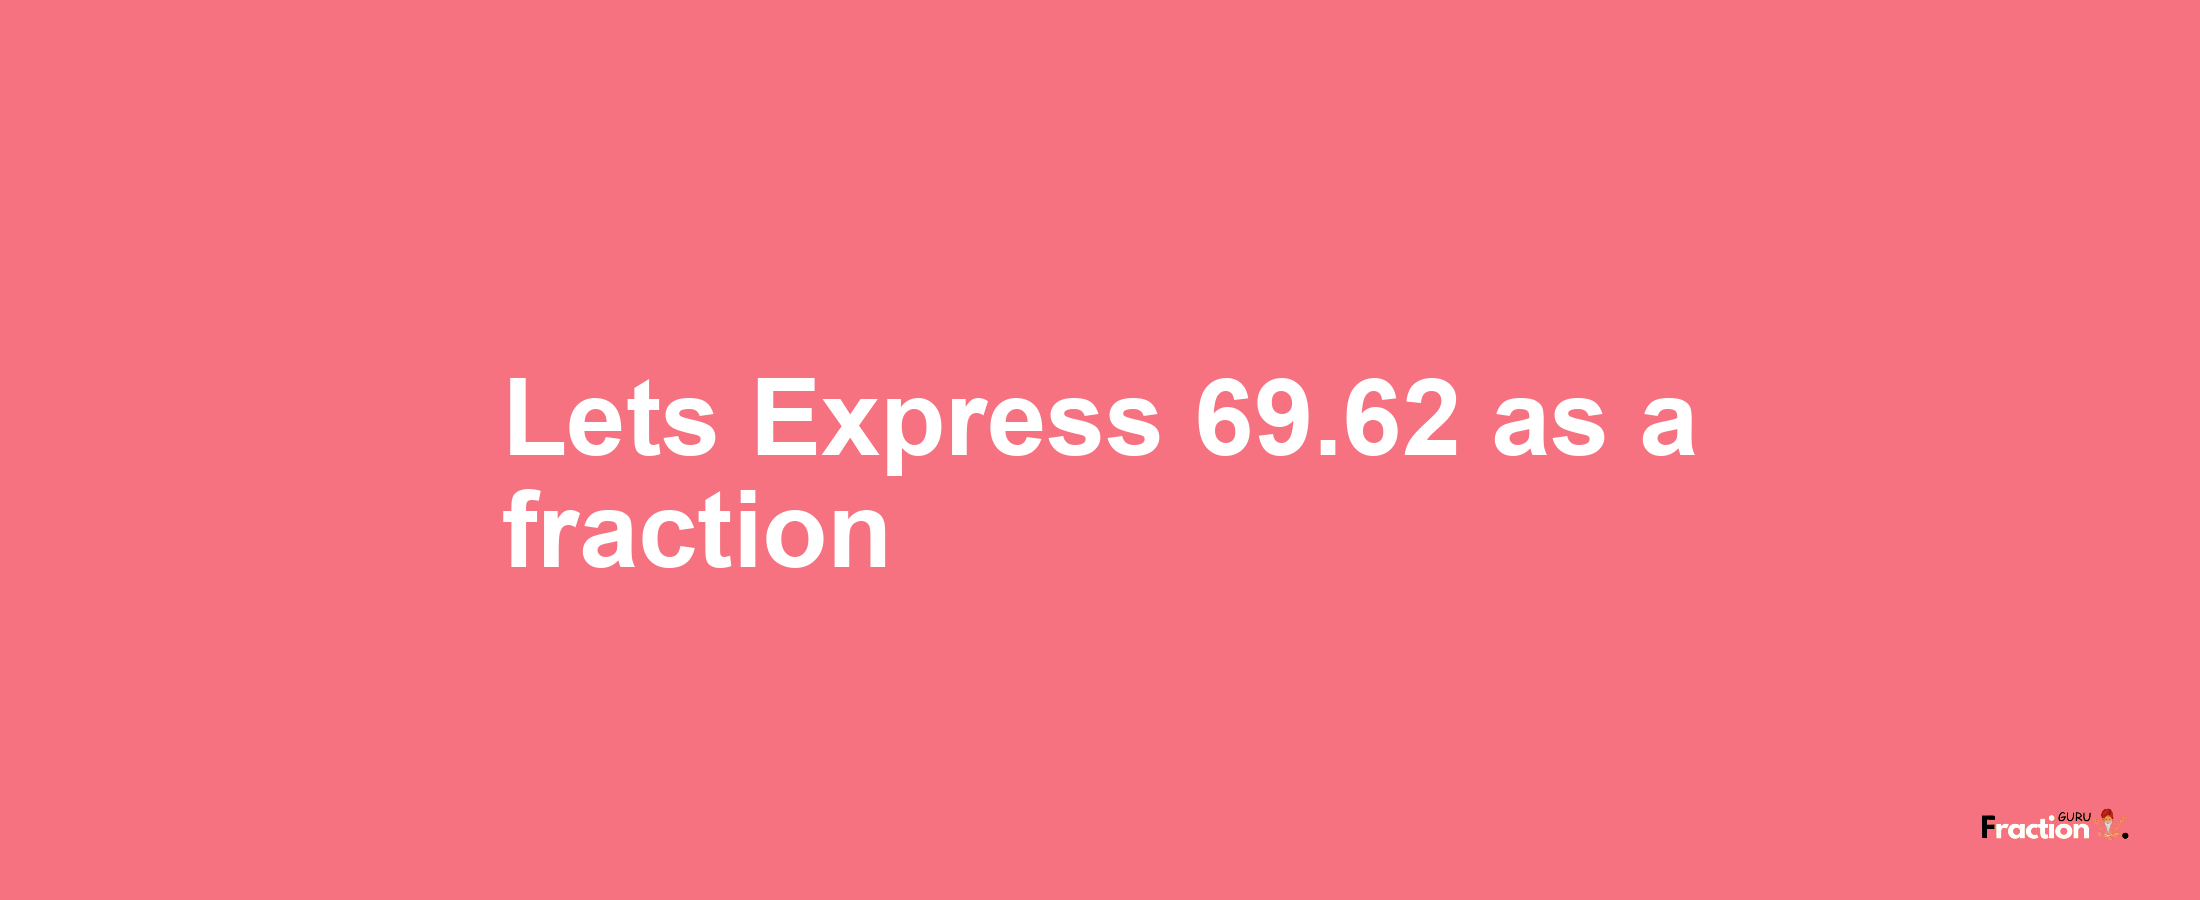 Lets Express 69.62 as afraction